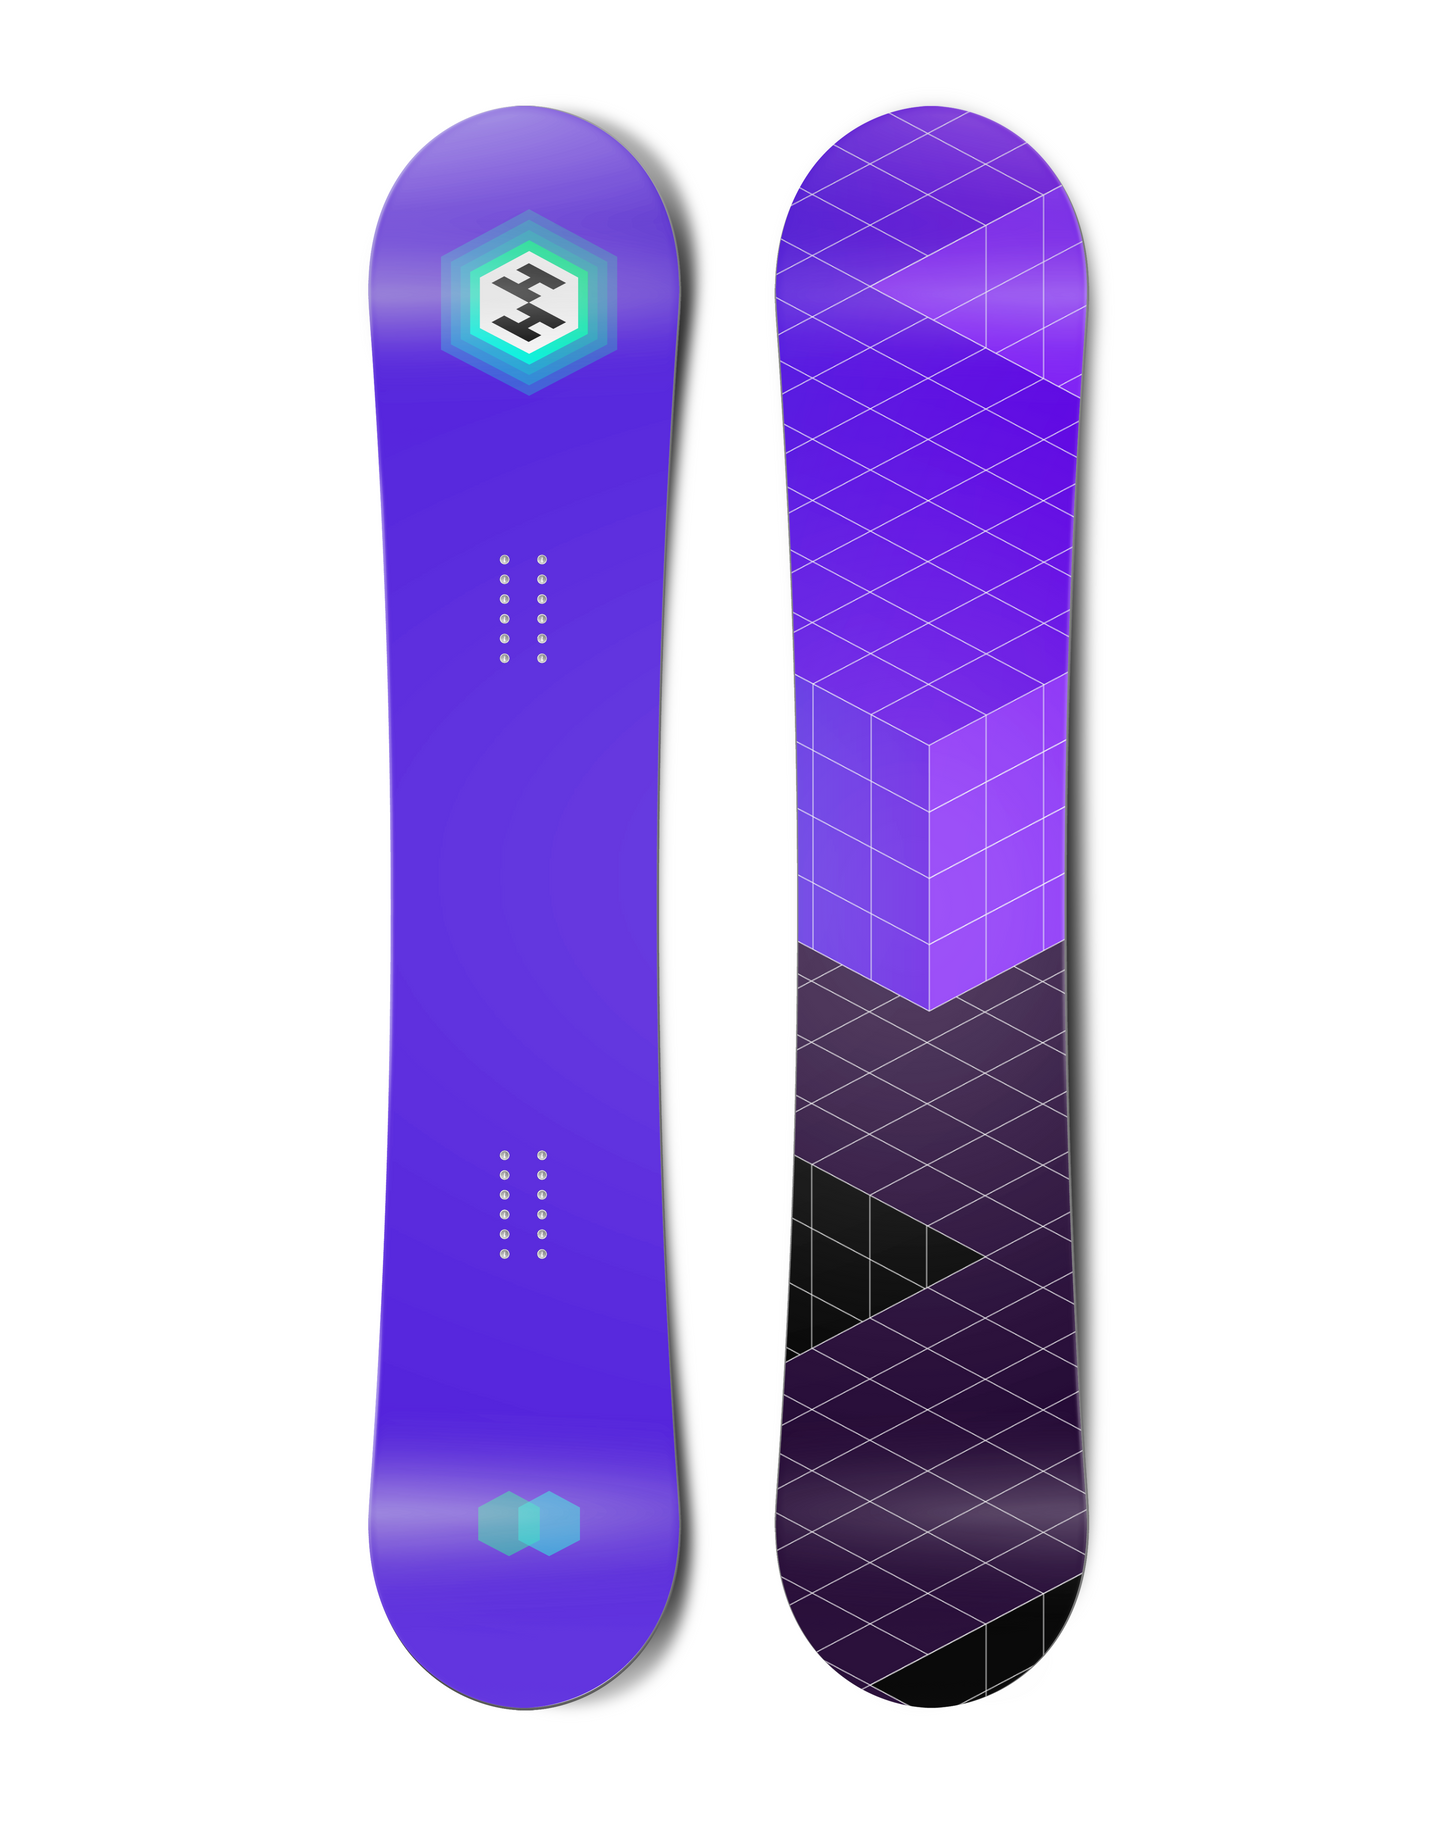 Top and bottom view of a snowboard. The top view shows a centred hexagonal logo for Hydrogen that
          appears to radiate outwards, as well as some overlapping hexagons at the bottom. The bottom view shows an
          abstract angular grid in purples.